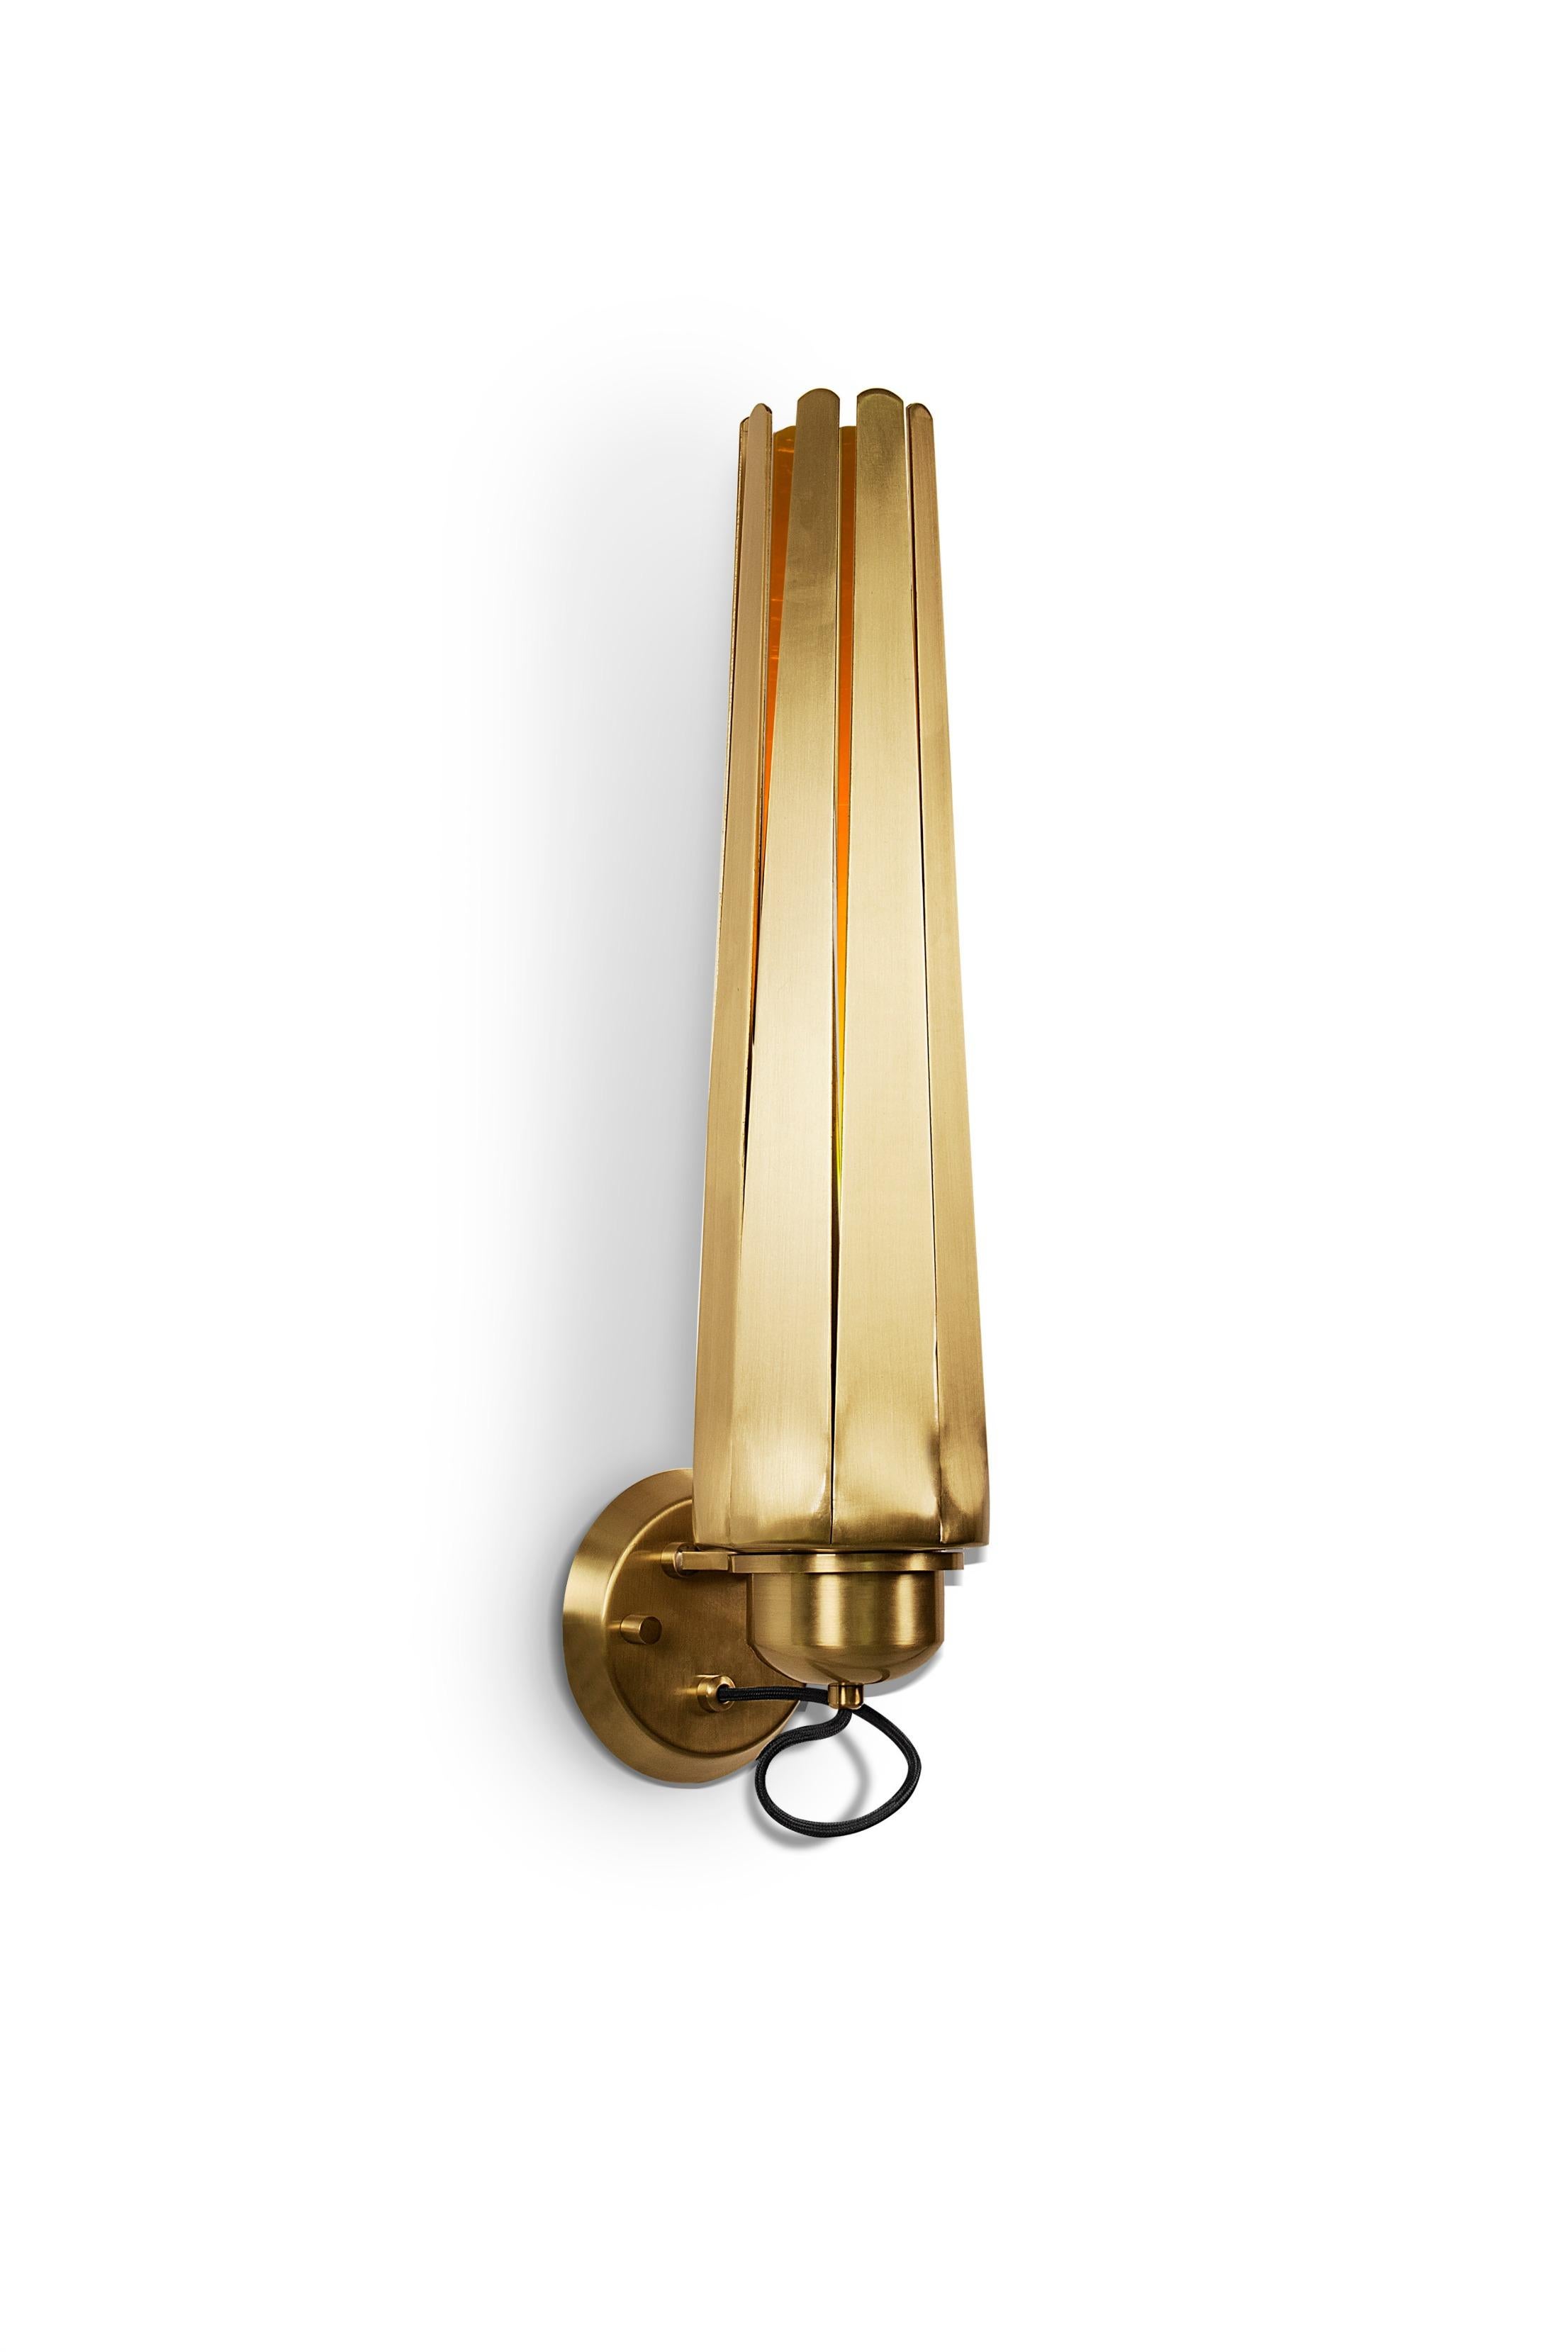 As a legend in Norse mythology, Valkie still has a cultural influence in Scandinavian lands. Its influence led to the creation of VALKIE Wall light, a contemporary lighting piece in matte brass. This wall lamp is a versatile piece that will shine